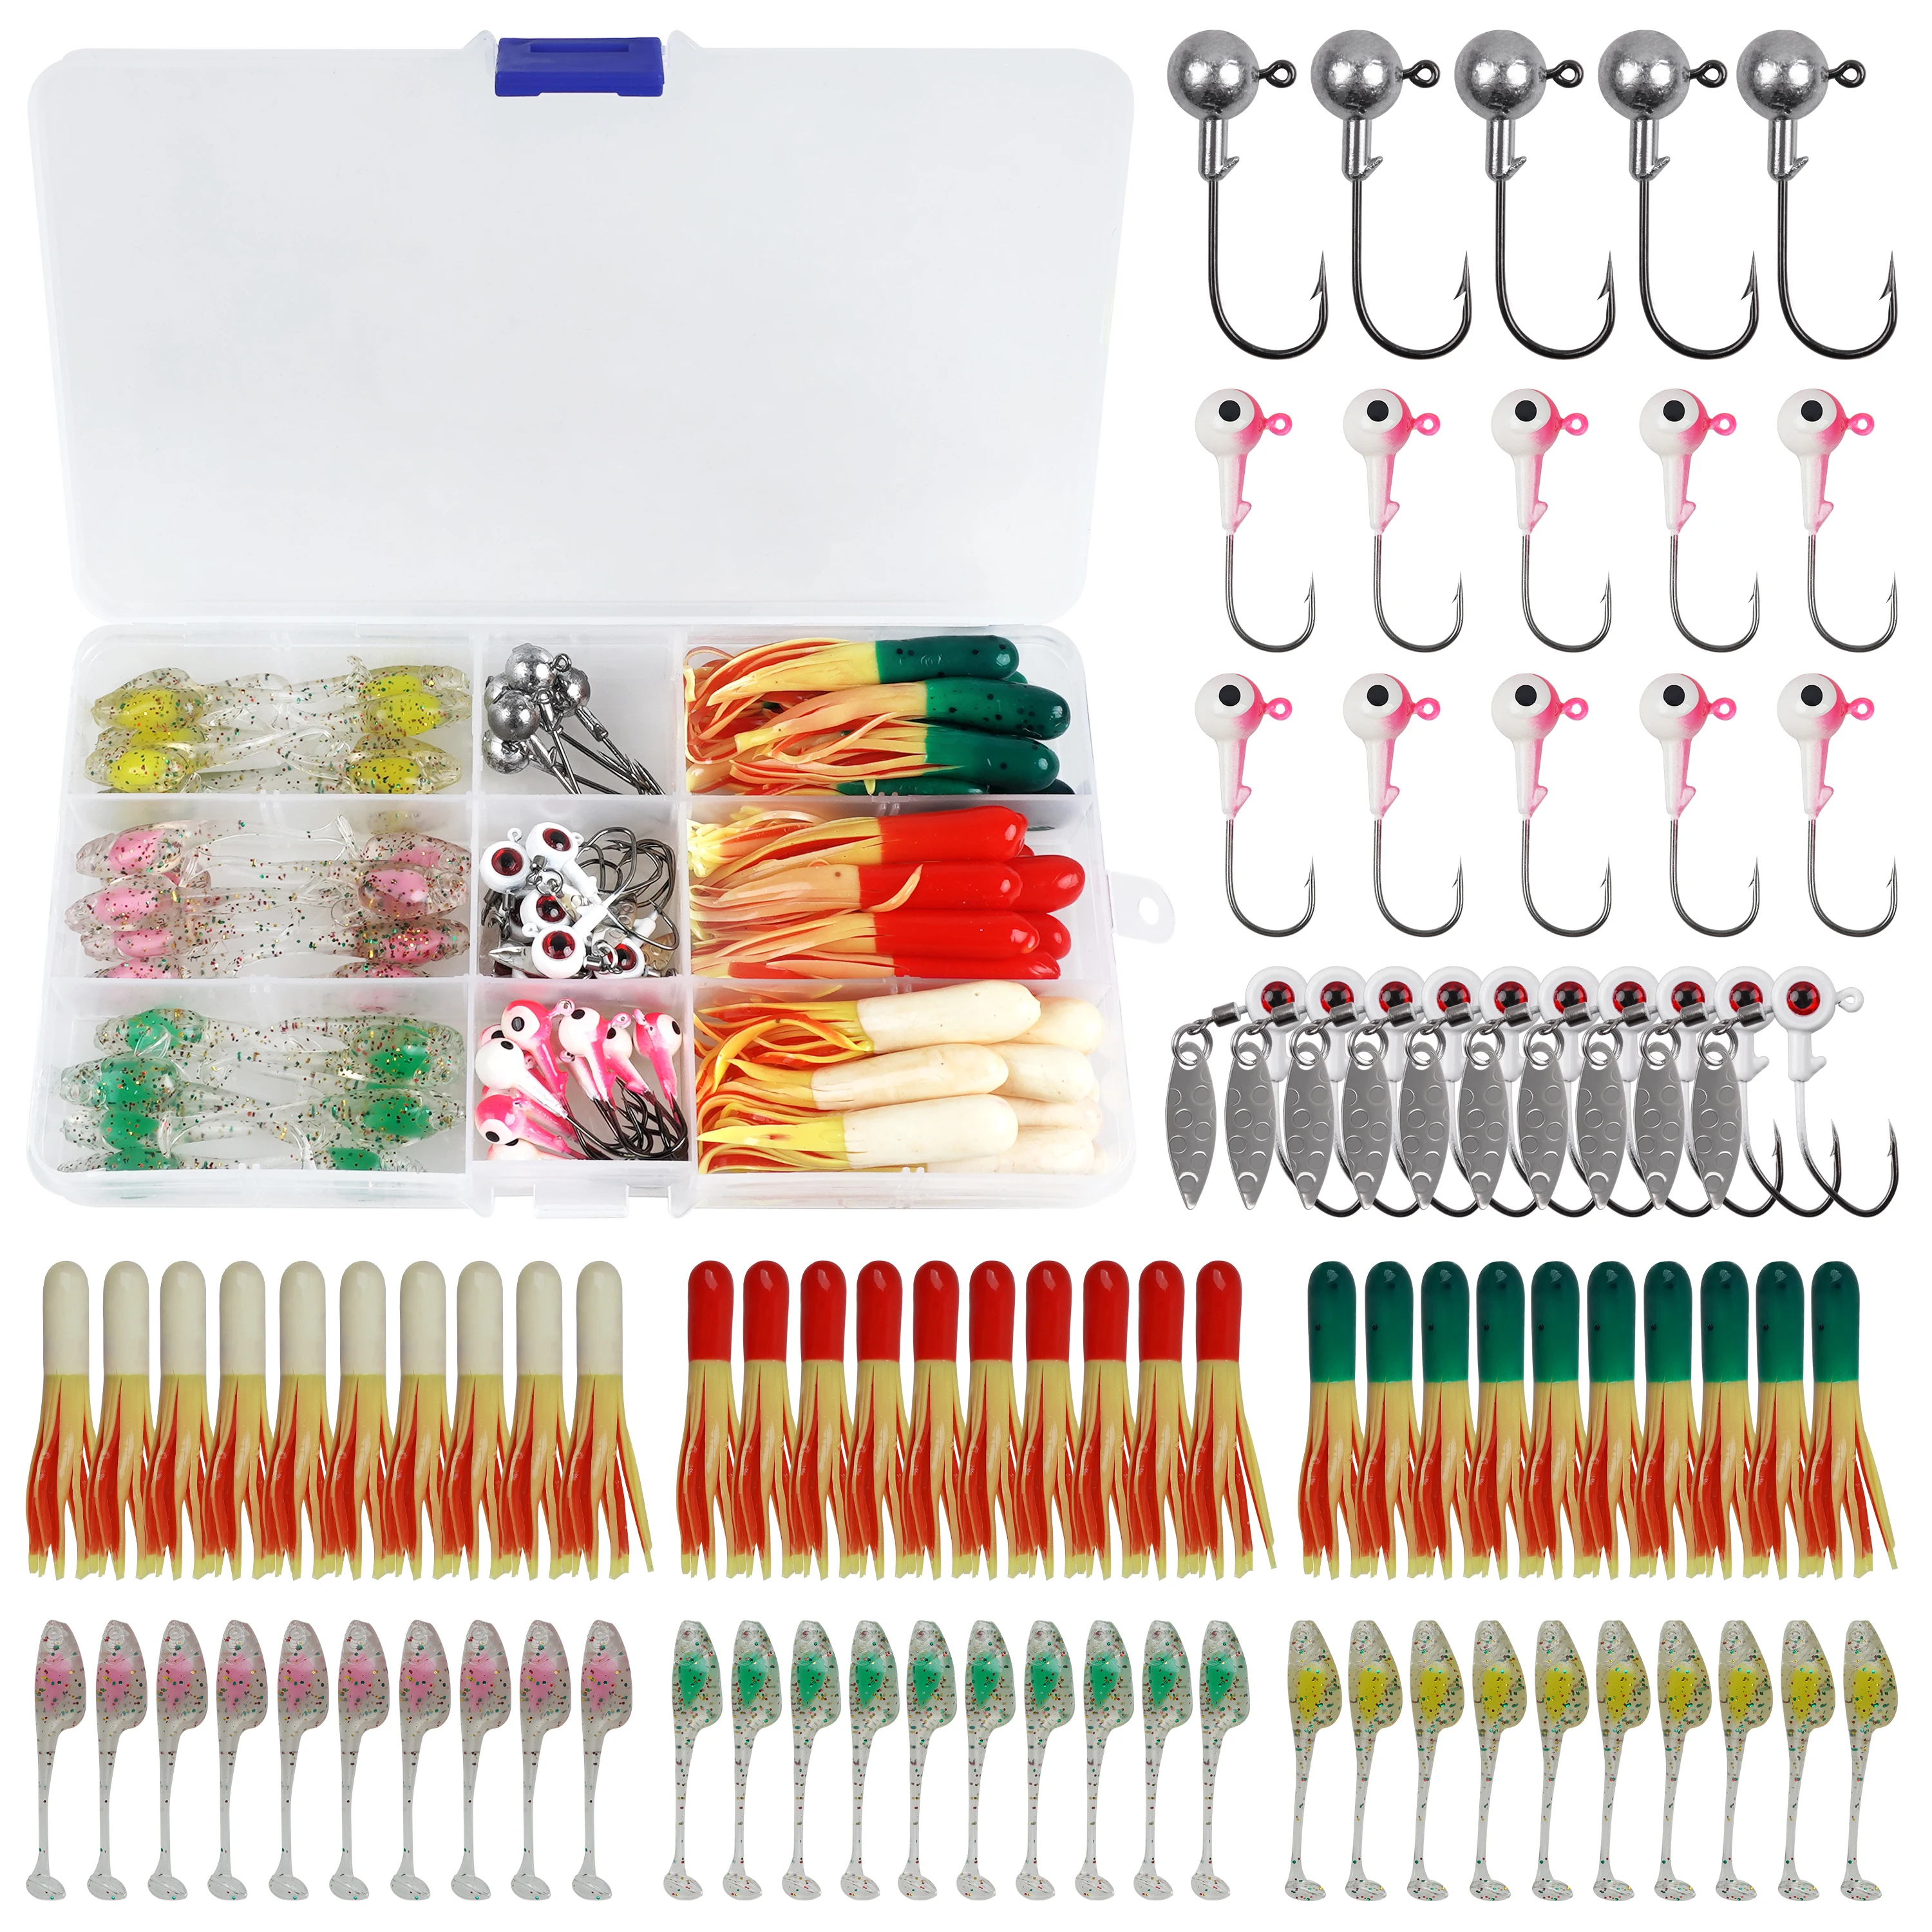 85pcs Crappie Lures kit Crappie Bait Set with Jig Heads Hooks Soft Plastic  Fishing Lures for Fishing Crappie Bass - AliExpress